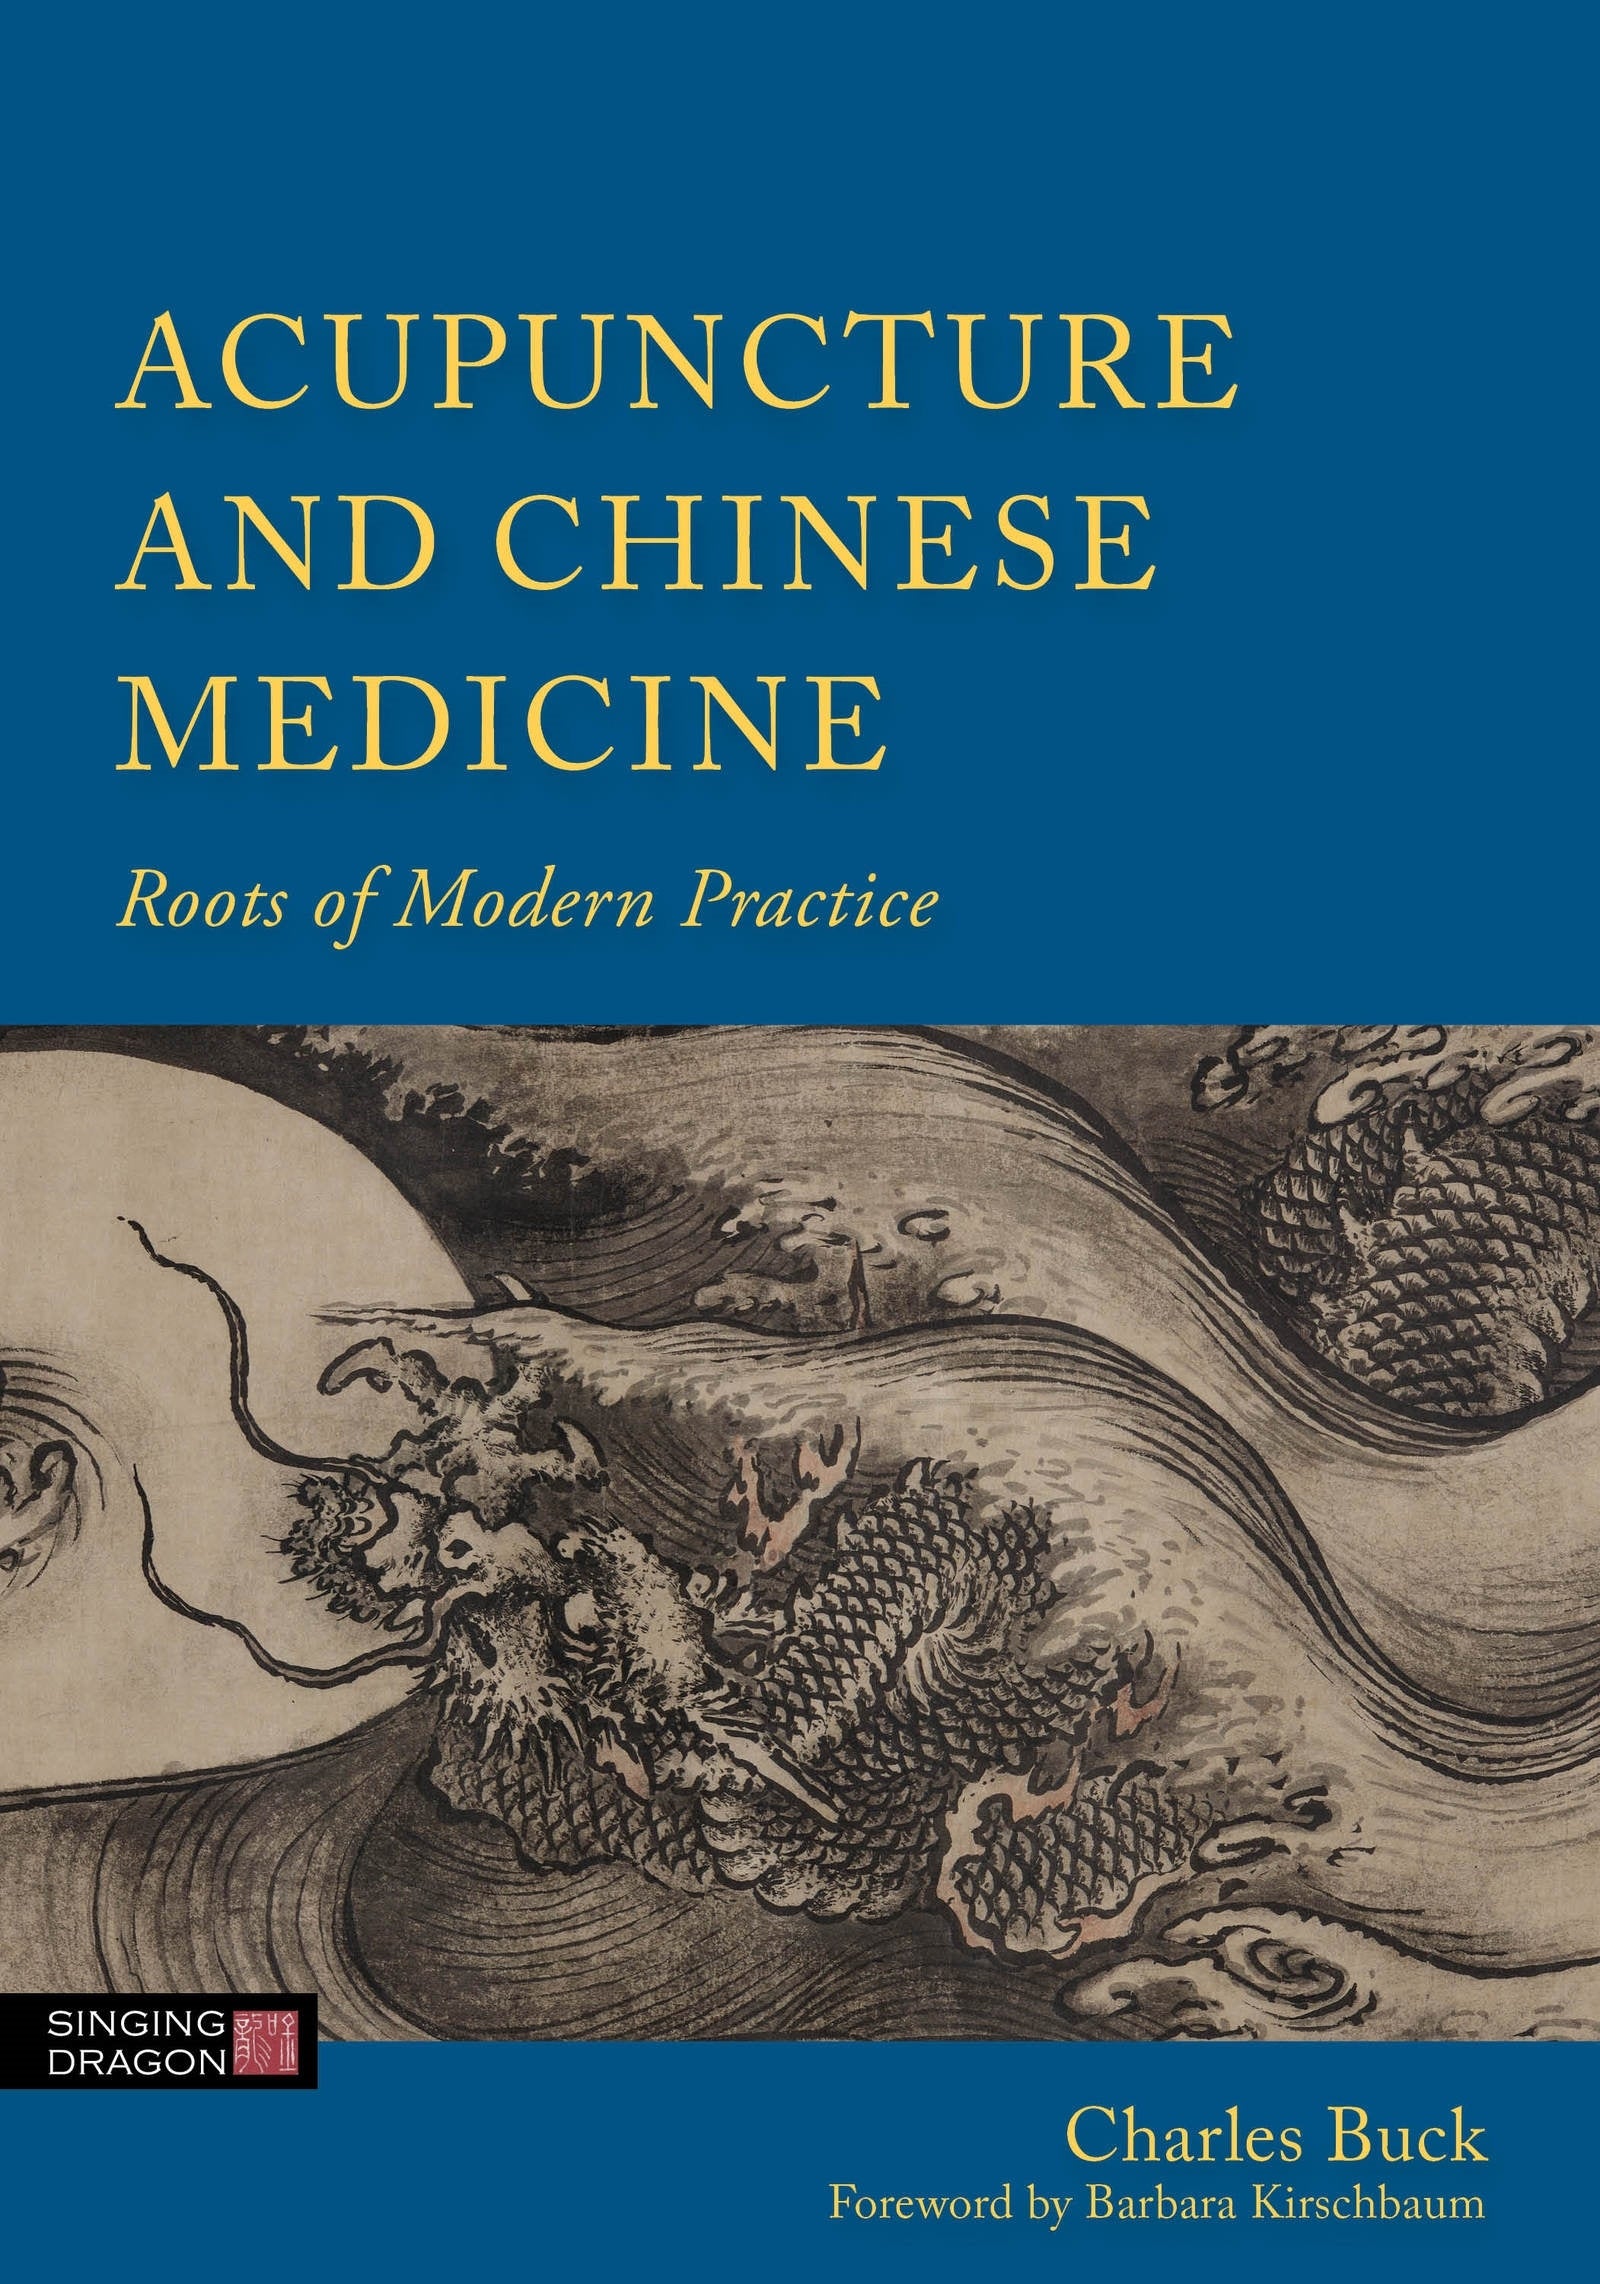 Acupuncture and Chinese Medicine by Charles Buck